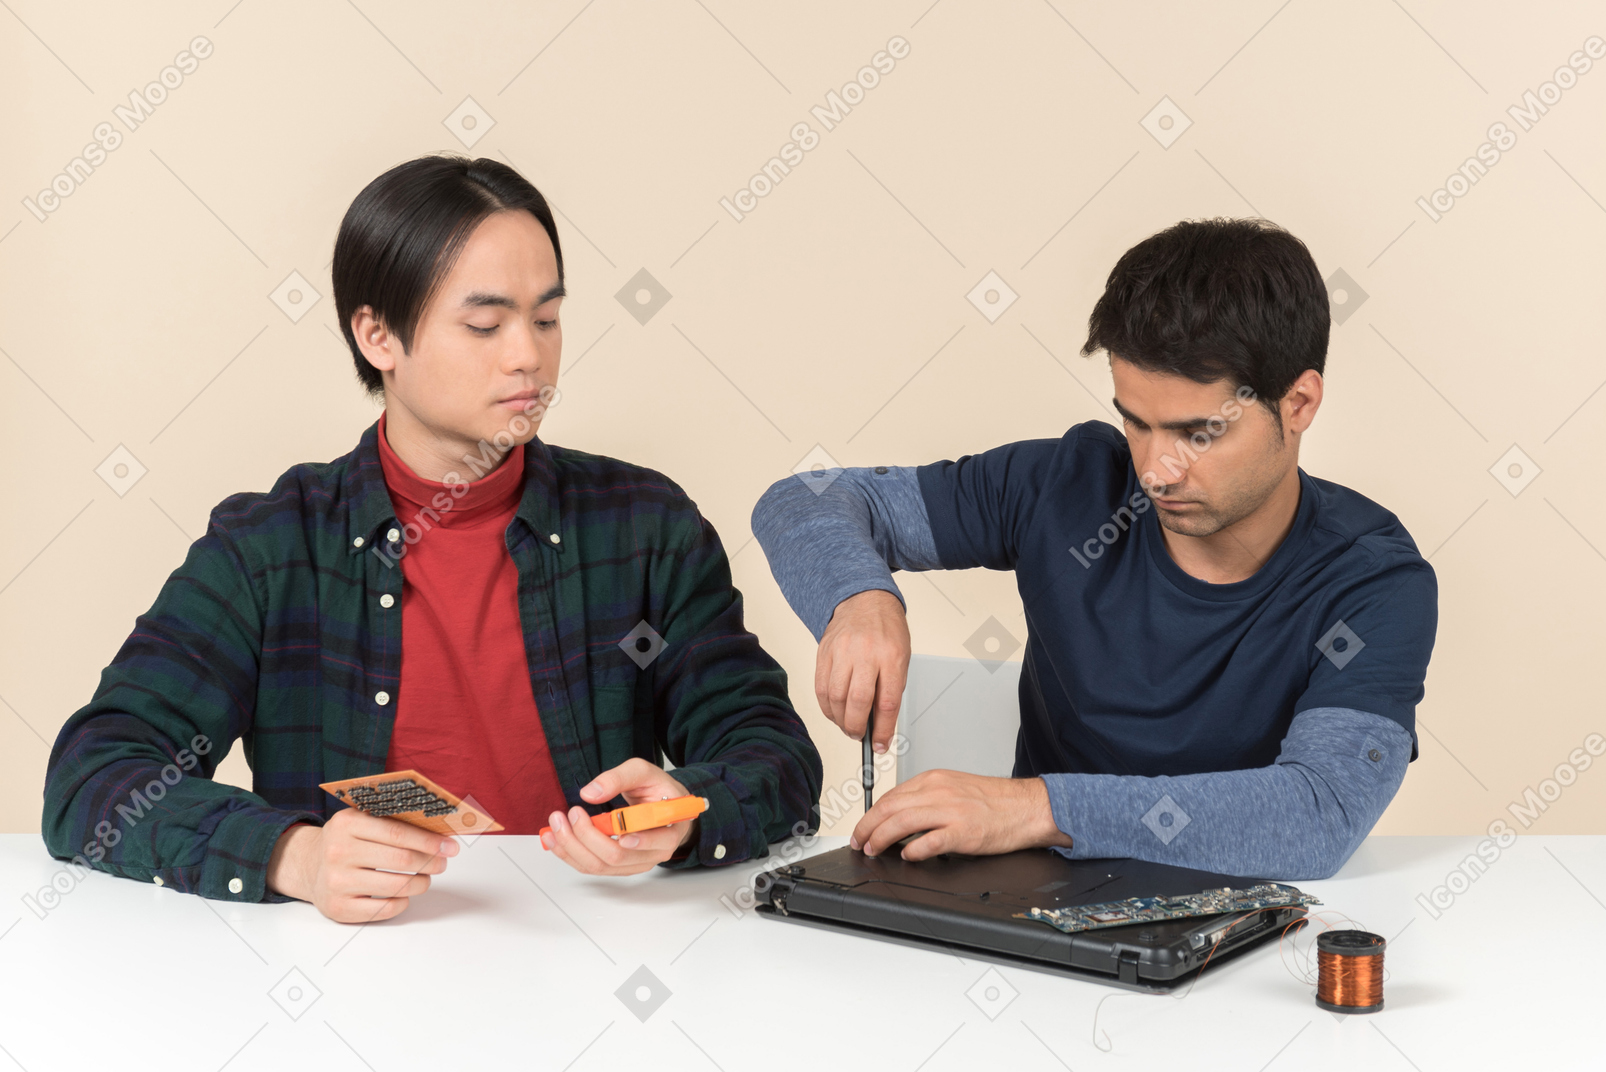 Two young geeks sitting at the table and having issues with fixing the laptop